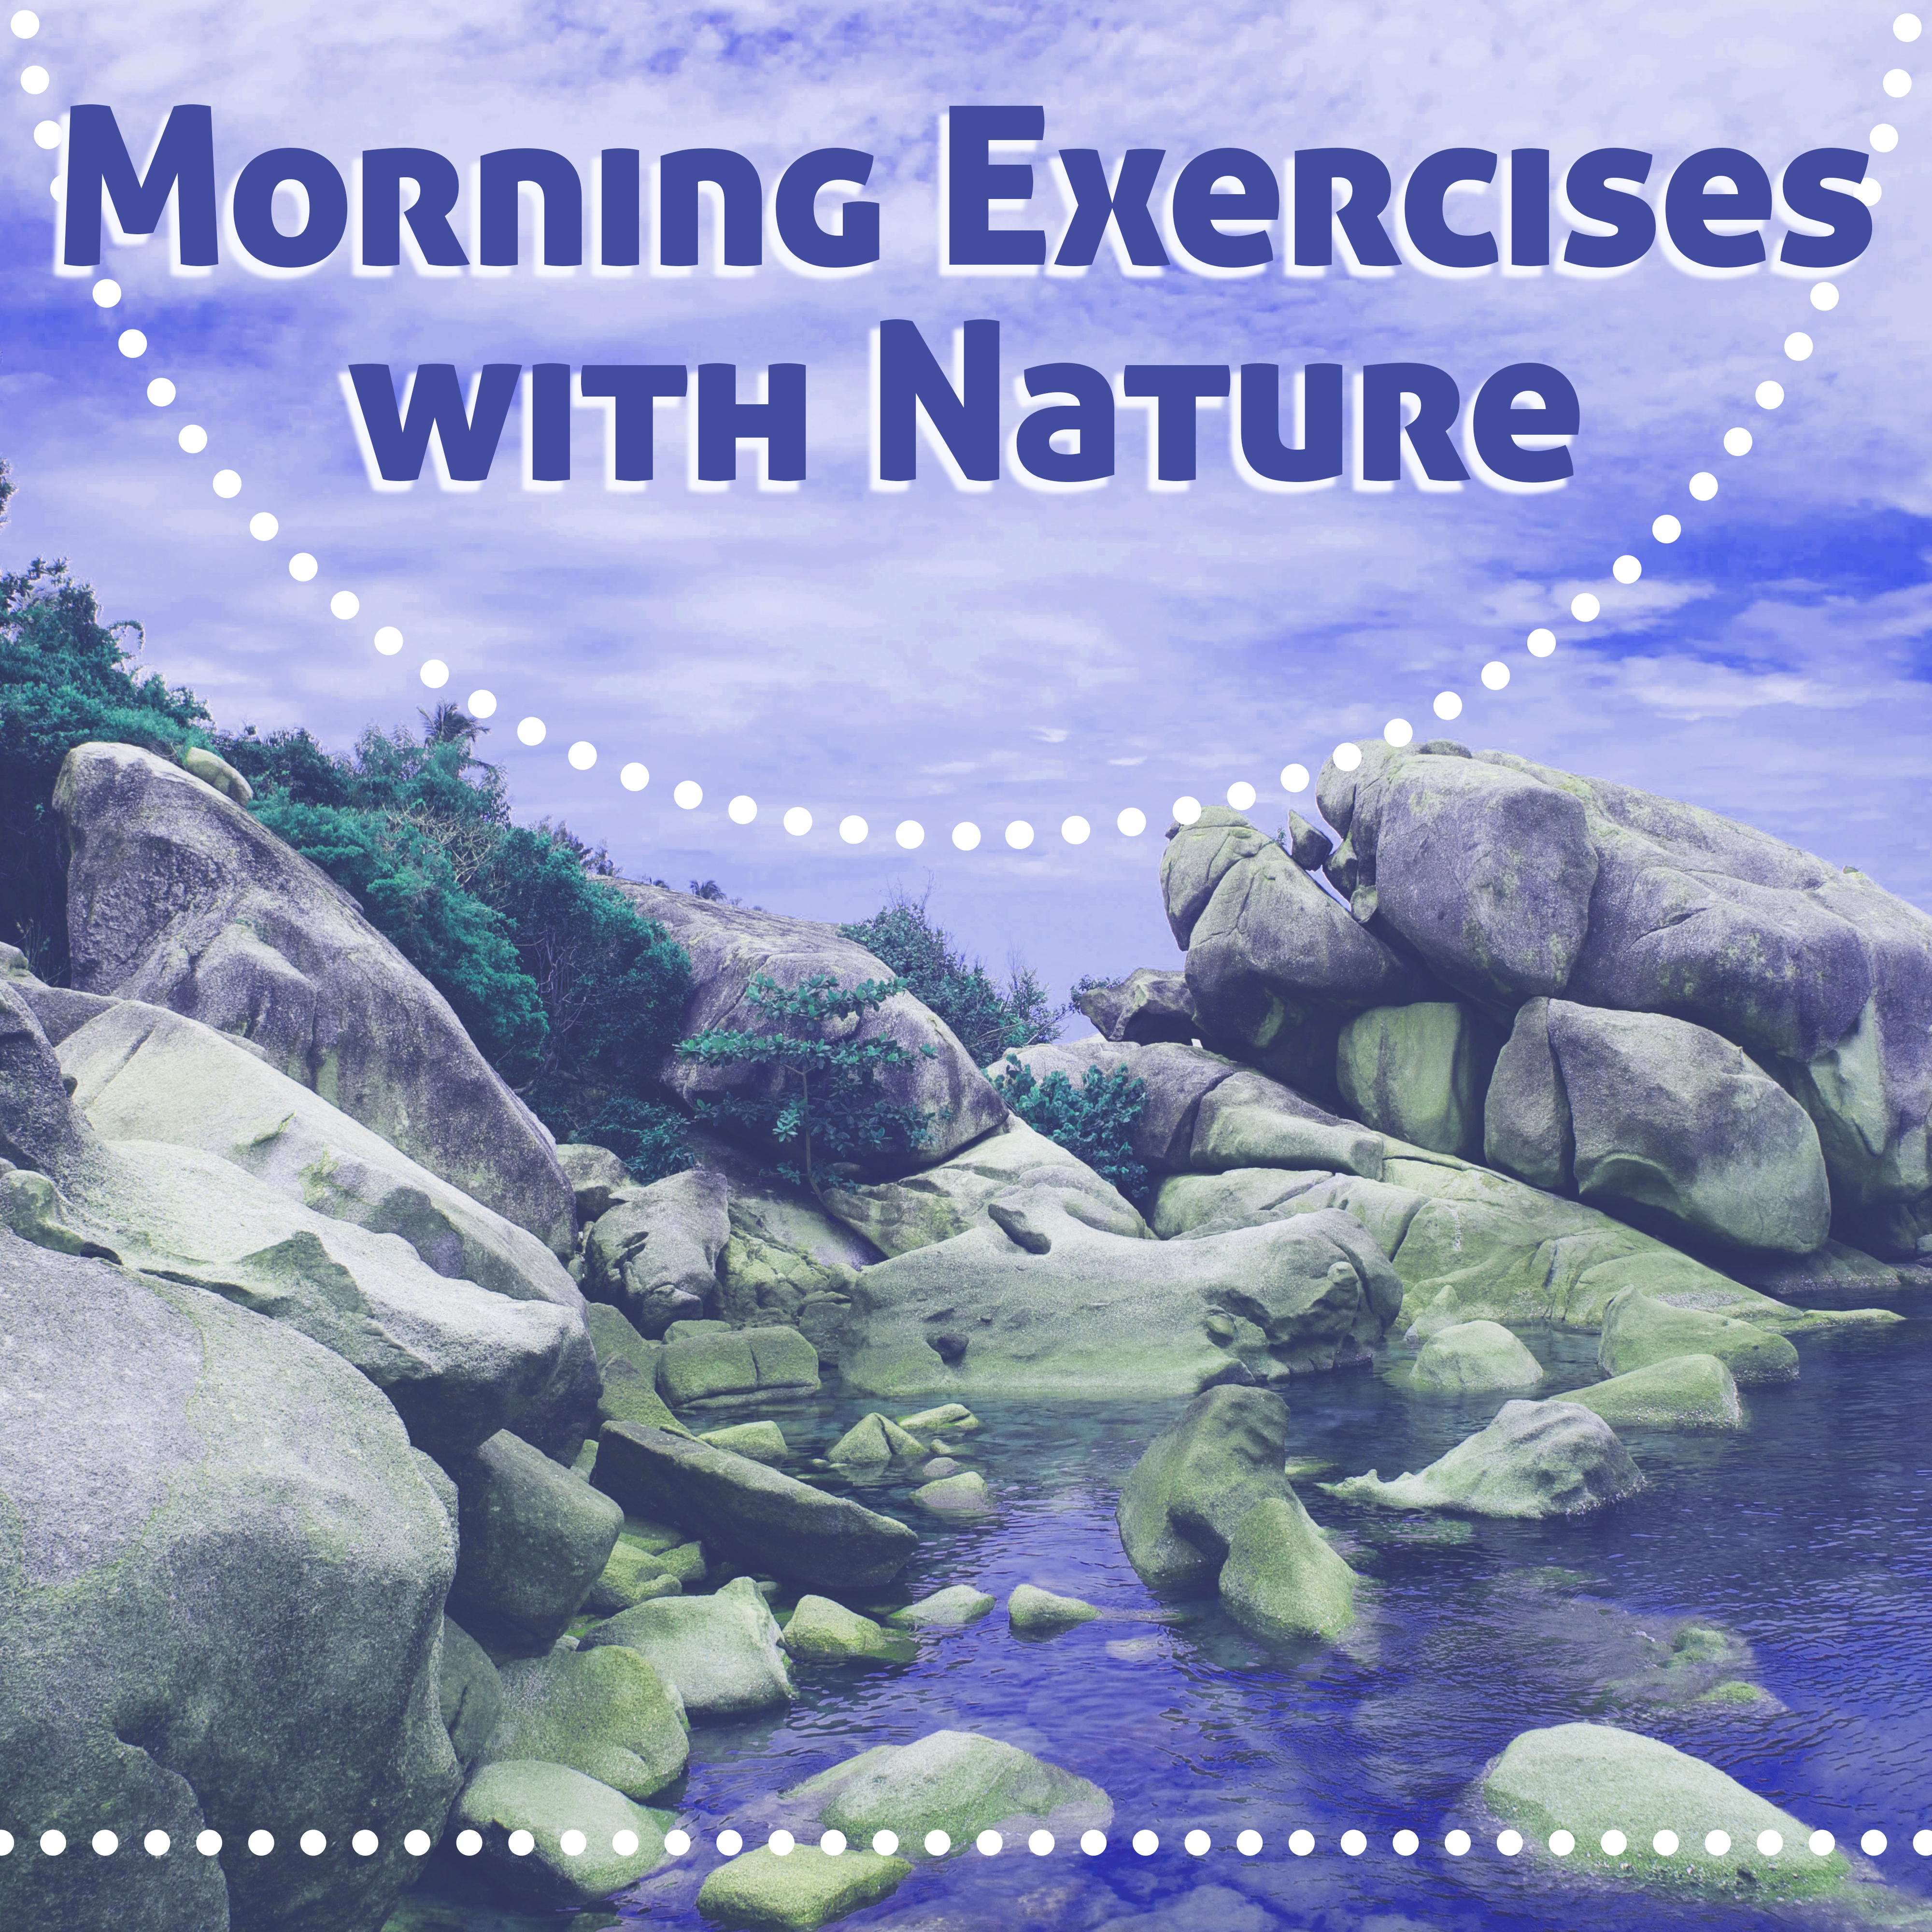 Morning Exercises with Nature - Natural Position Yoga, Wonderful Morning, Quiet Moments